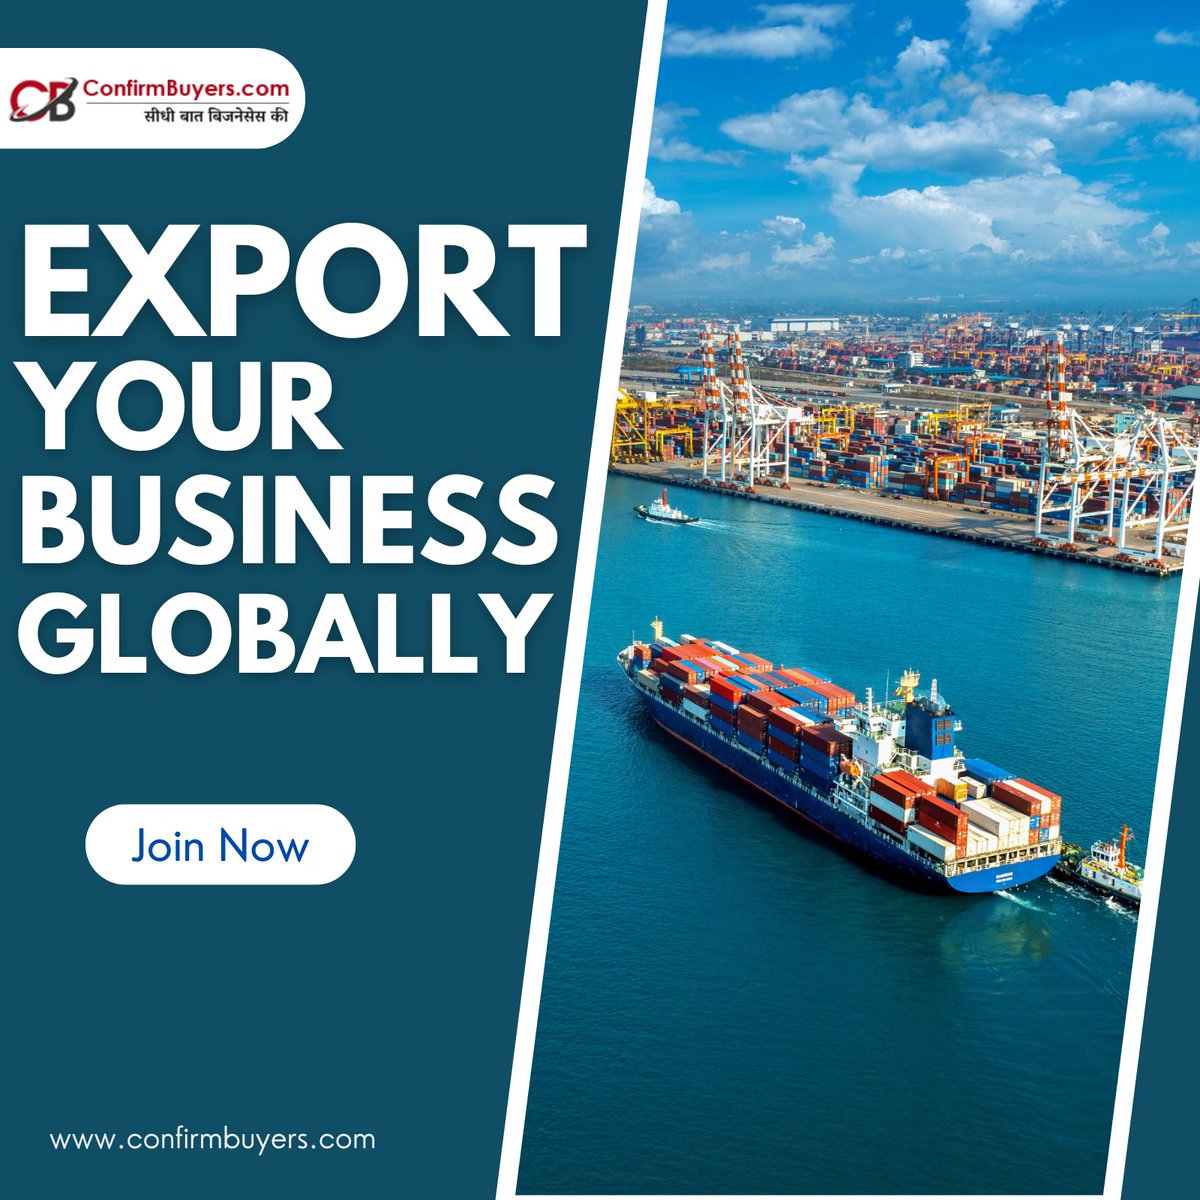 Join us on an electrifying voyage! Enroll now and dive into the thrill of the journey that awaits! ✨

#ExportImportSuccess #GlobalTradePartner #SecureDeals #export #exportbusiness #exportimport #exporters #business #businesses #smallbusinessowner #businessideas #growth #sales